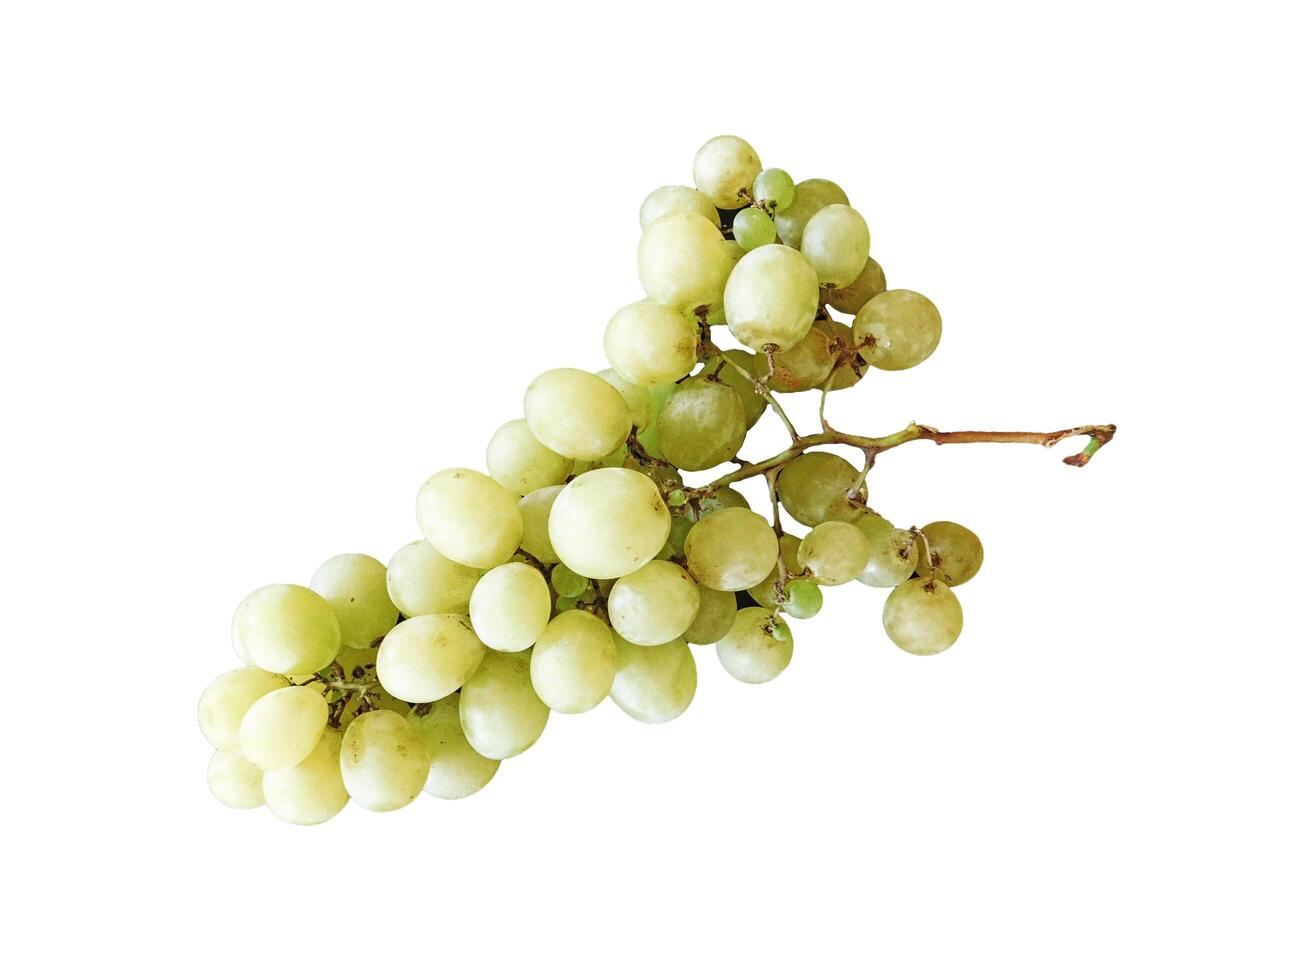 Grapes In The Kitchen On White Background photo